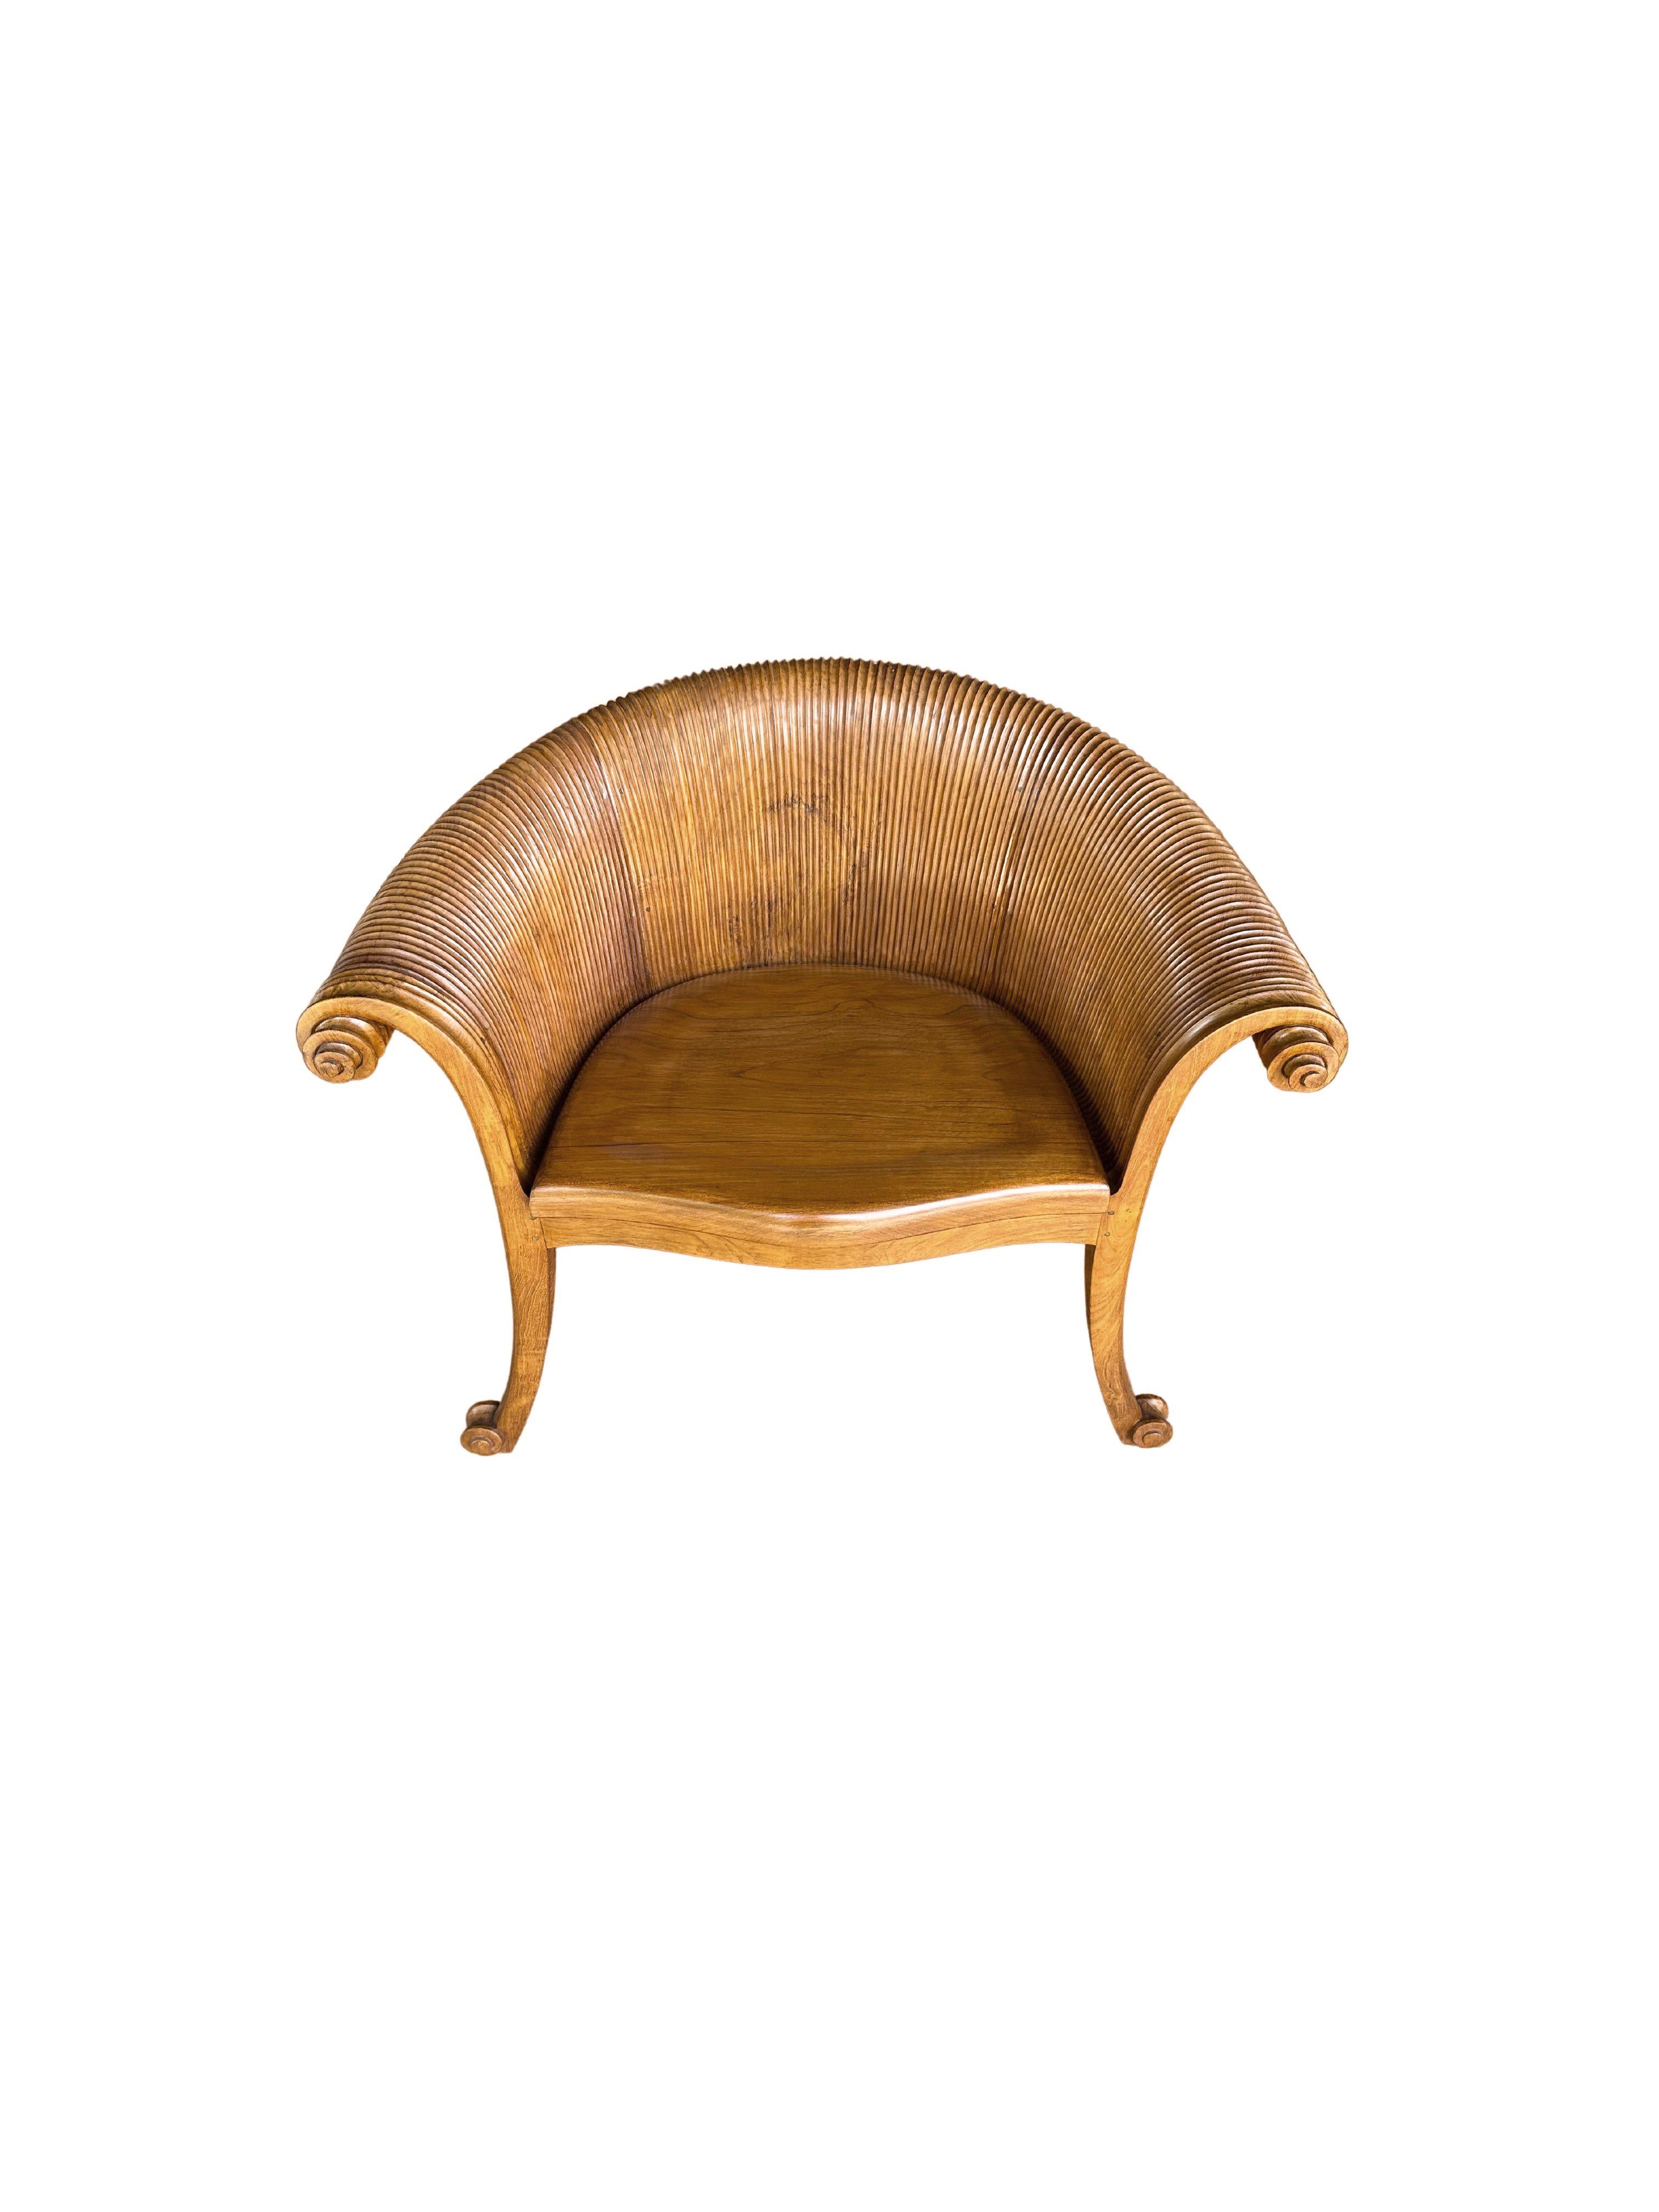 A wonderfully sculptural teak wood chair featuring intricately carved curves and ribbed detailing. Resembling a curved lotus leaf it features a strong organic form. The mix of wood textures and shades adds to its charm. A unique piece of